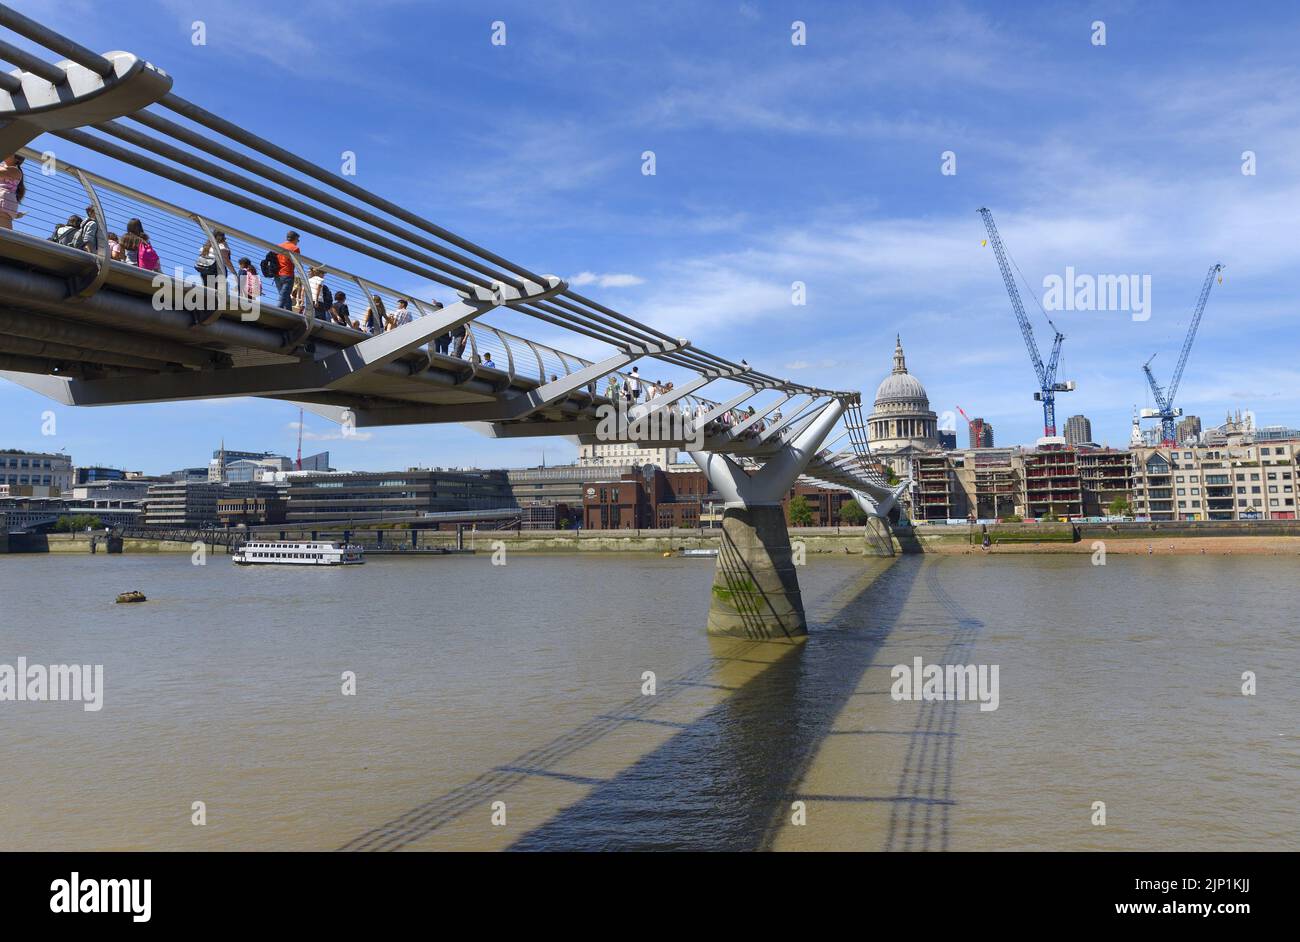 London, England, UK. Millennium Bridge across the River Thames to St Paul's Cathedral Stock Photo